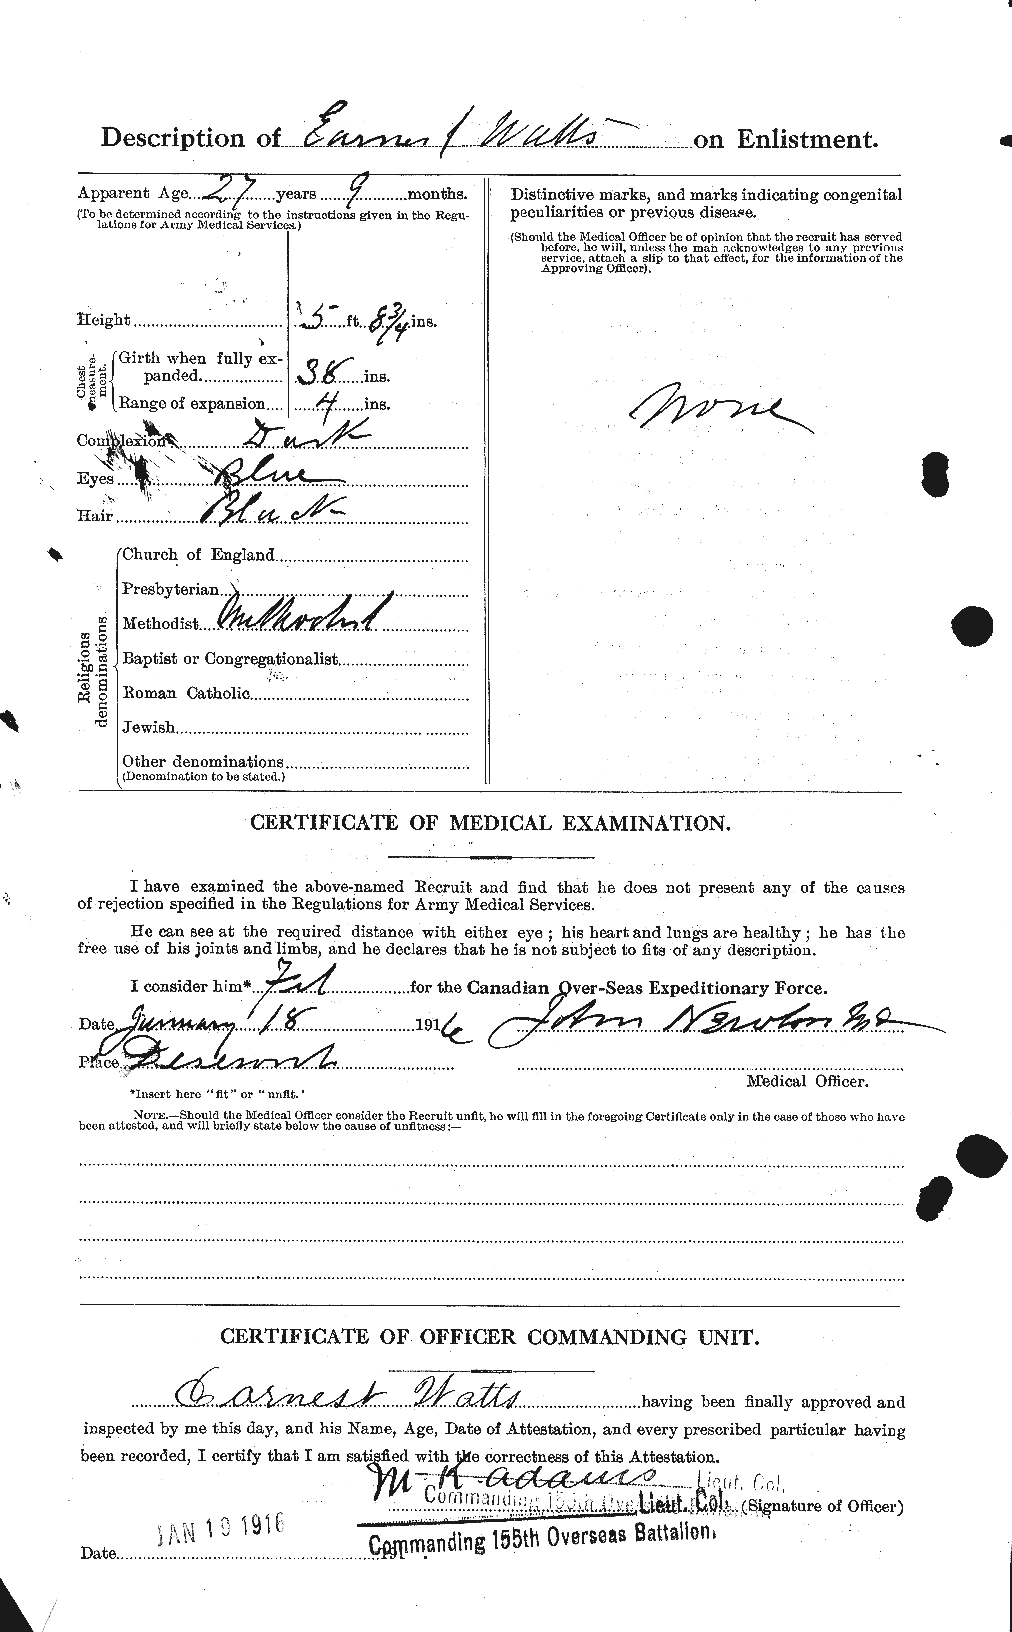 Personnel Records of the First World War - CEF 662746b